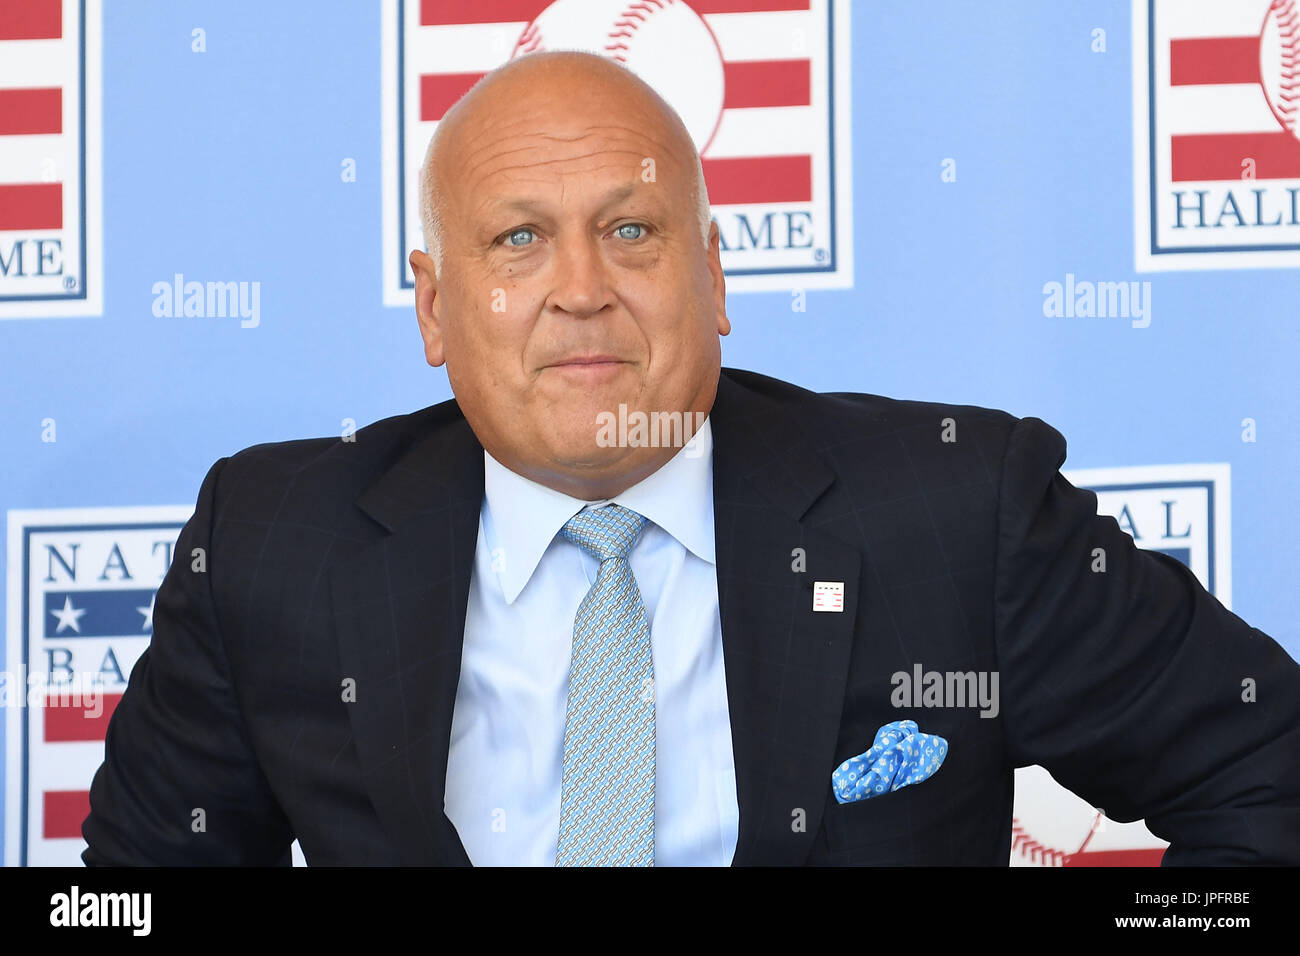 New York, NY, USA. 29th July, 2017. Hall of Fame member Cal Ripken Jr. attends the National Baseball Hall of Fame Induction Ceremony at Clark Sports Center on July 30, 2017 during the Induction Weekend in Cooperstown, New York. Credit: John Palmer/Media Punch/Alamy Live News Stock Photo